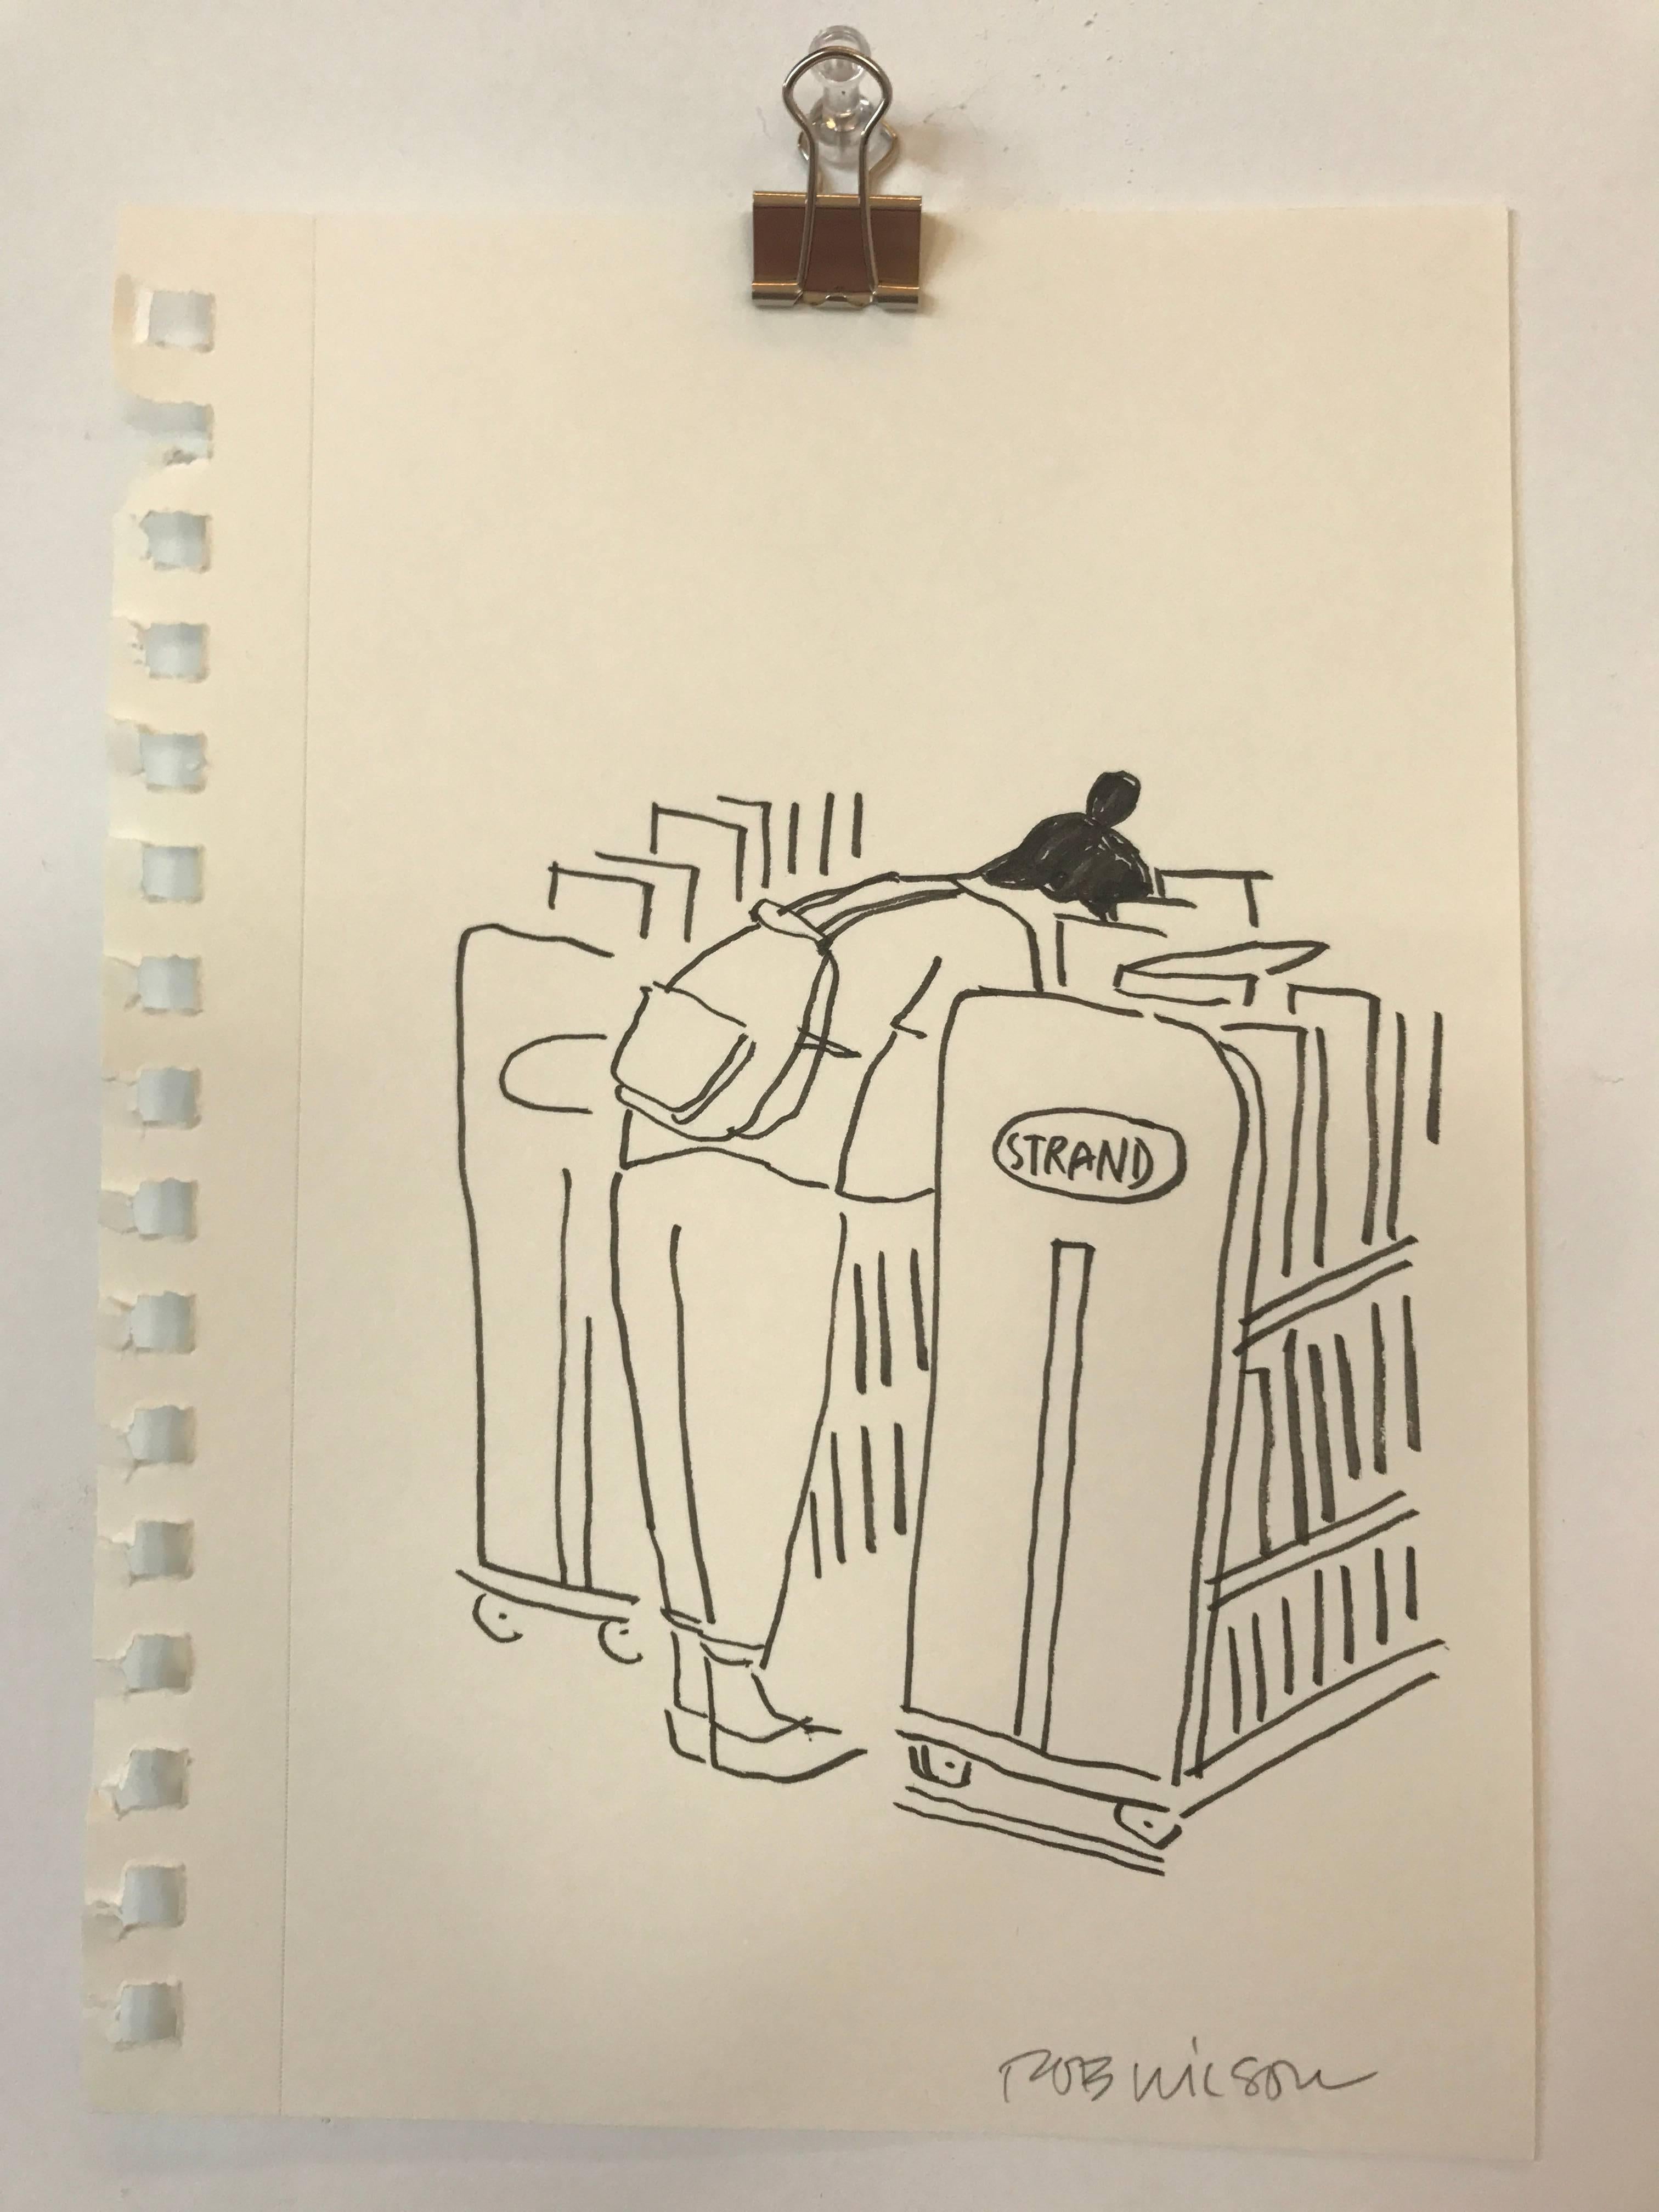 Nationally published illustrator Rob Wilson frequents Strand Bookstore in New York, where he snaps other shoppers that catch his eye and then captures them in one of a kind drawings in the pages of his sketchbook. These signed ink on paper drawings